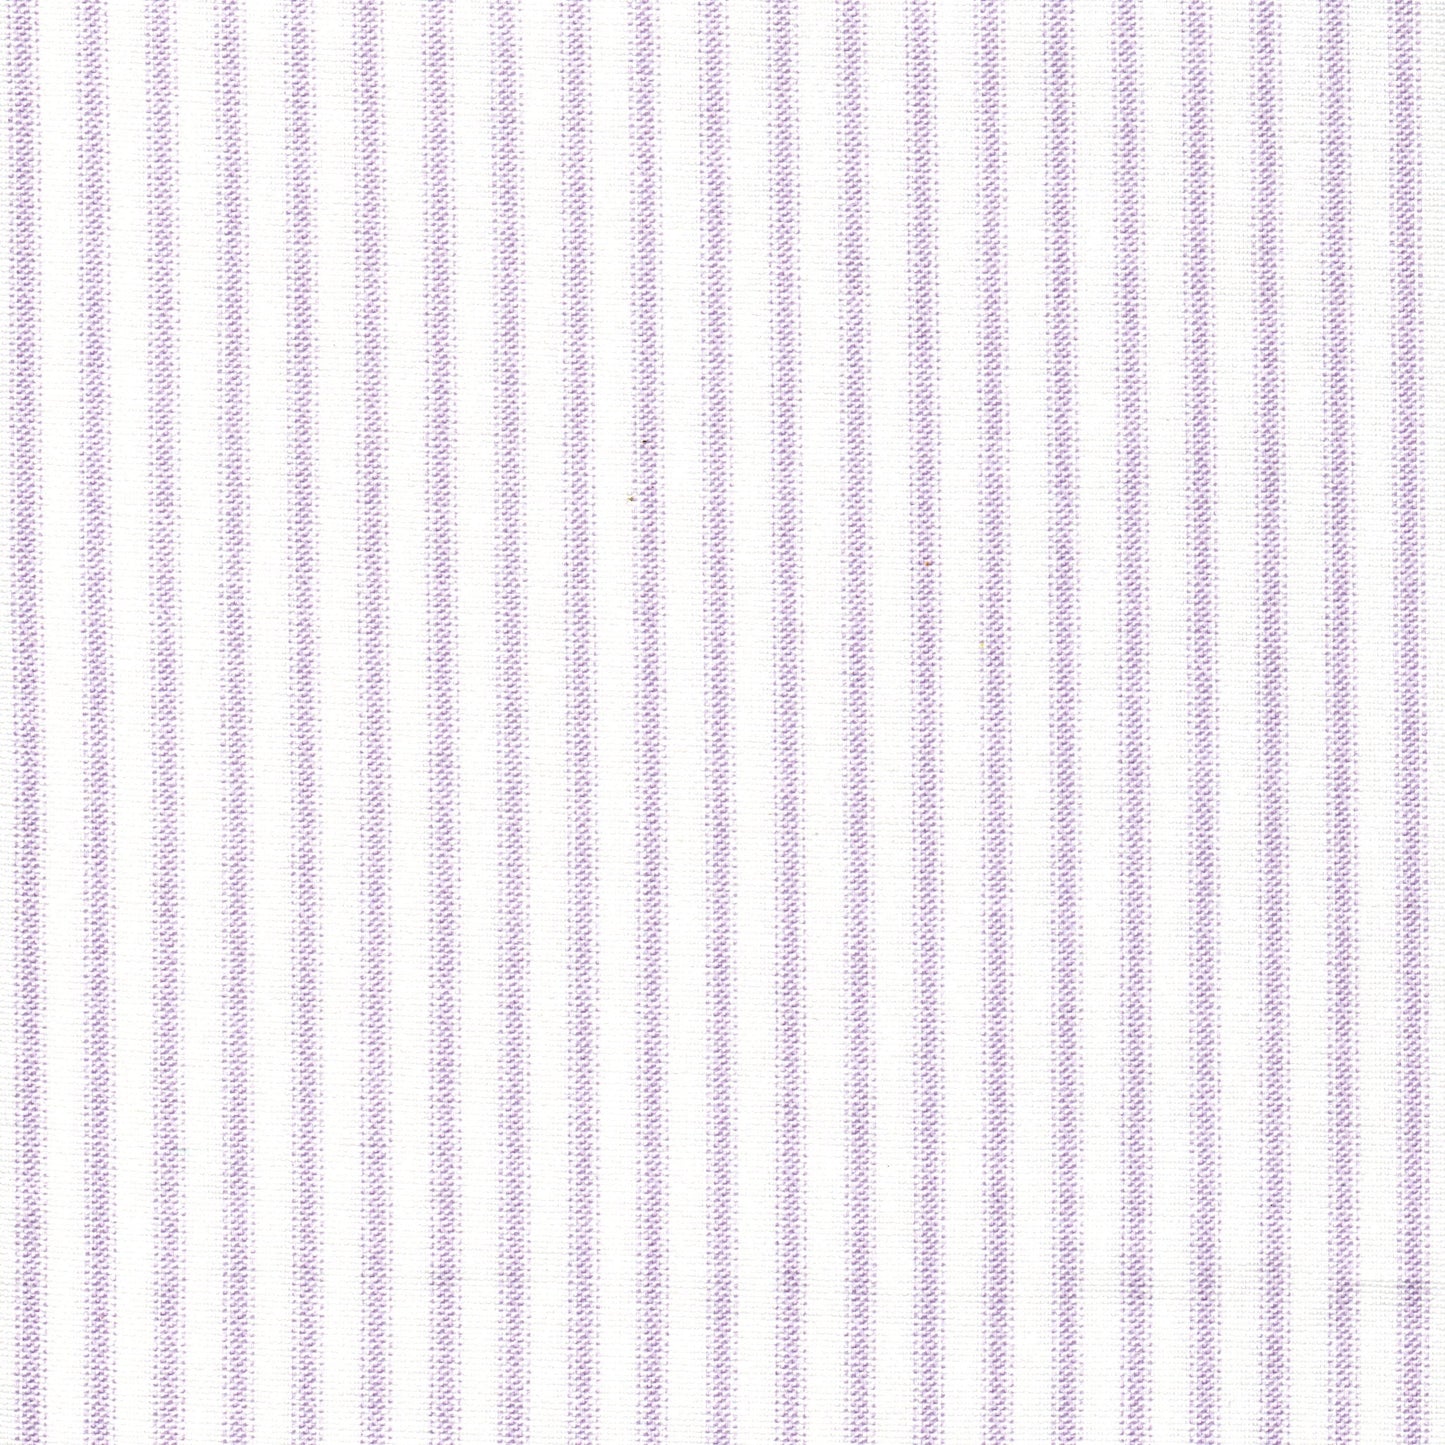 Gathered Bedskirt in Classic Orchid Lavender Ticking Stripe on White